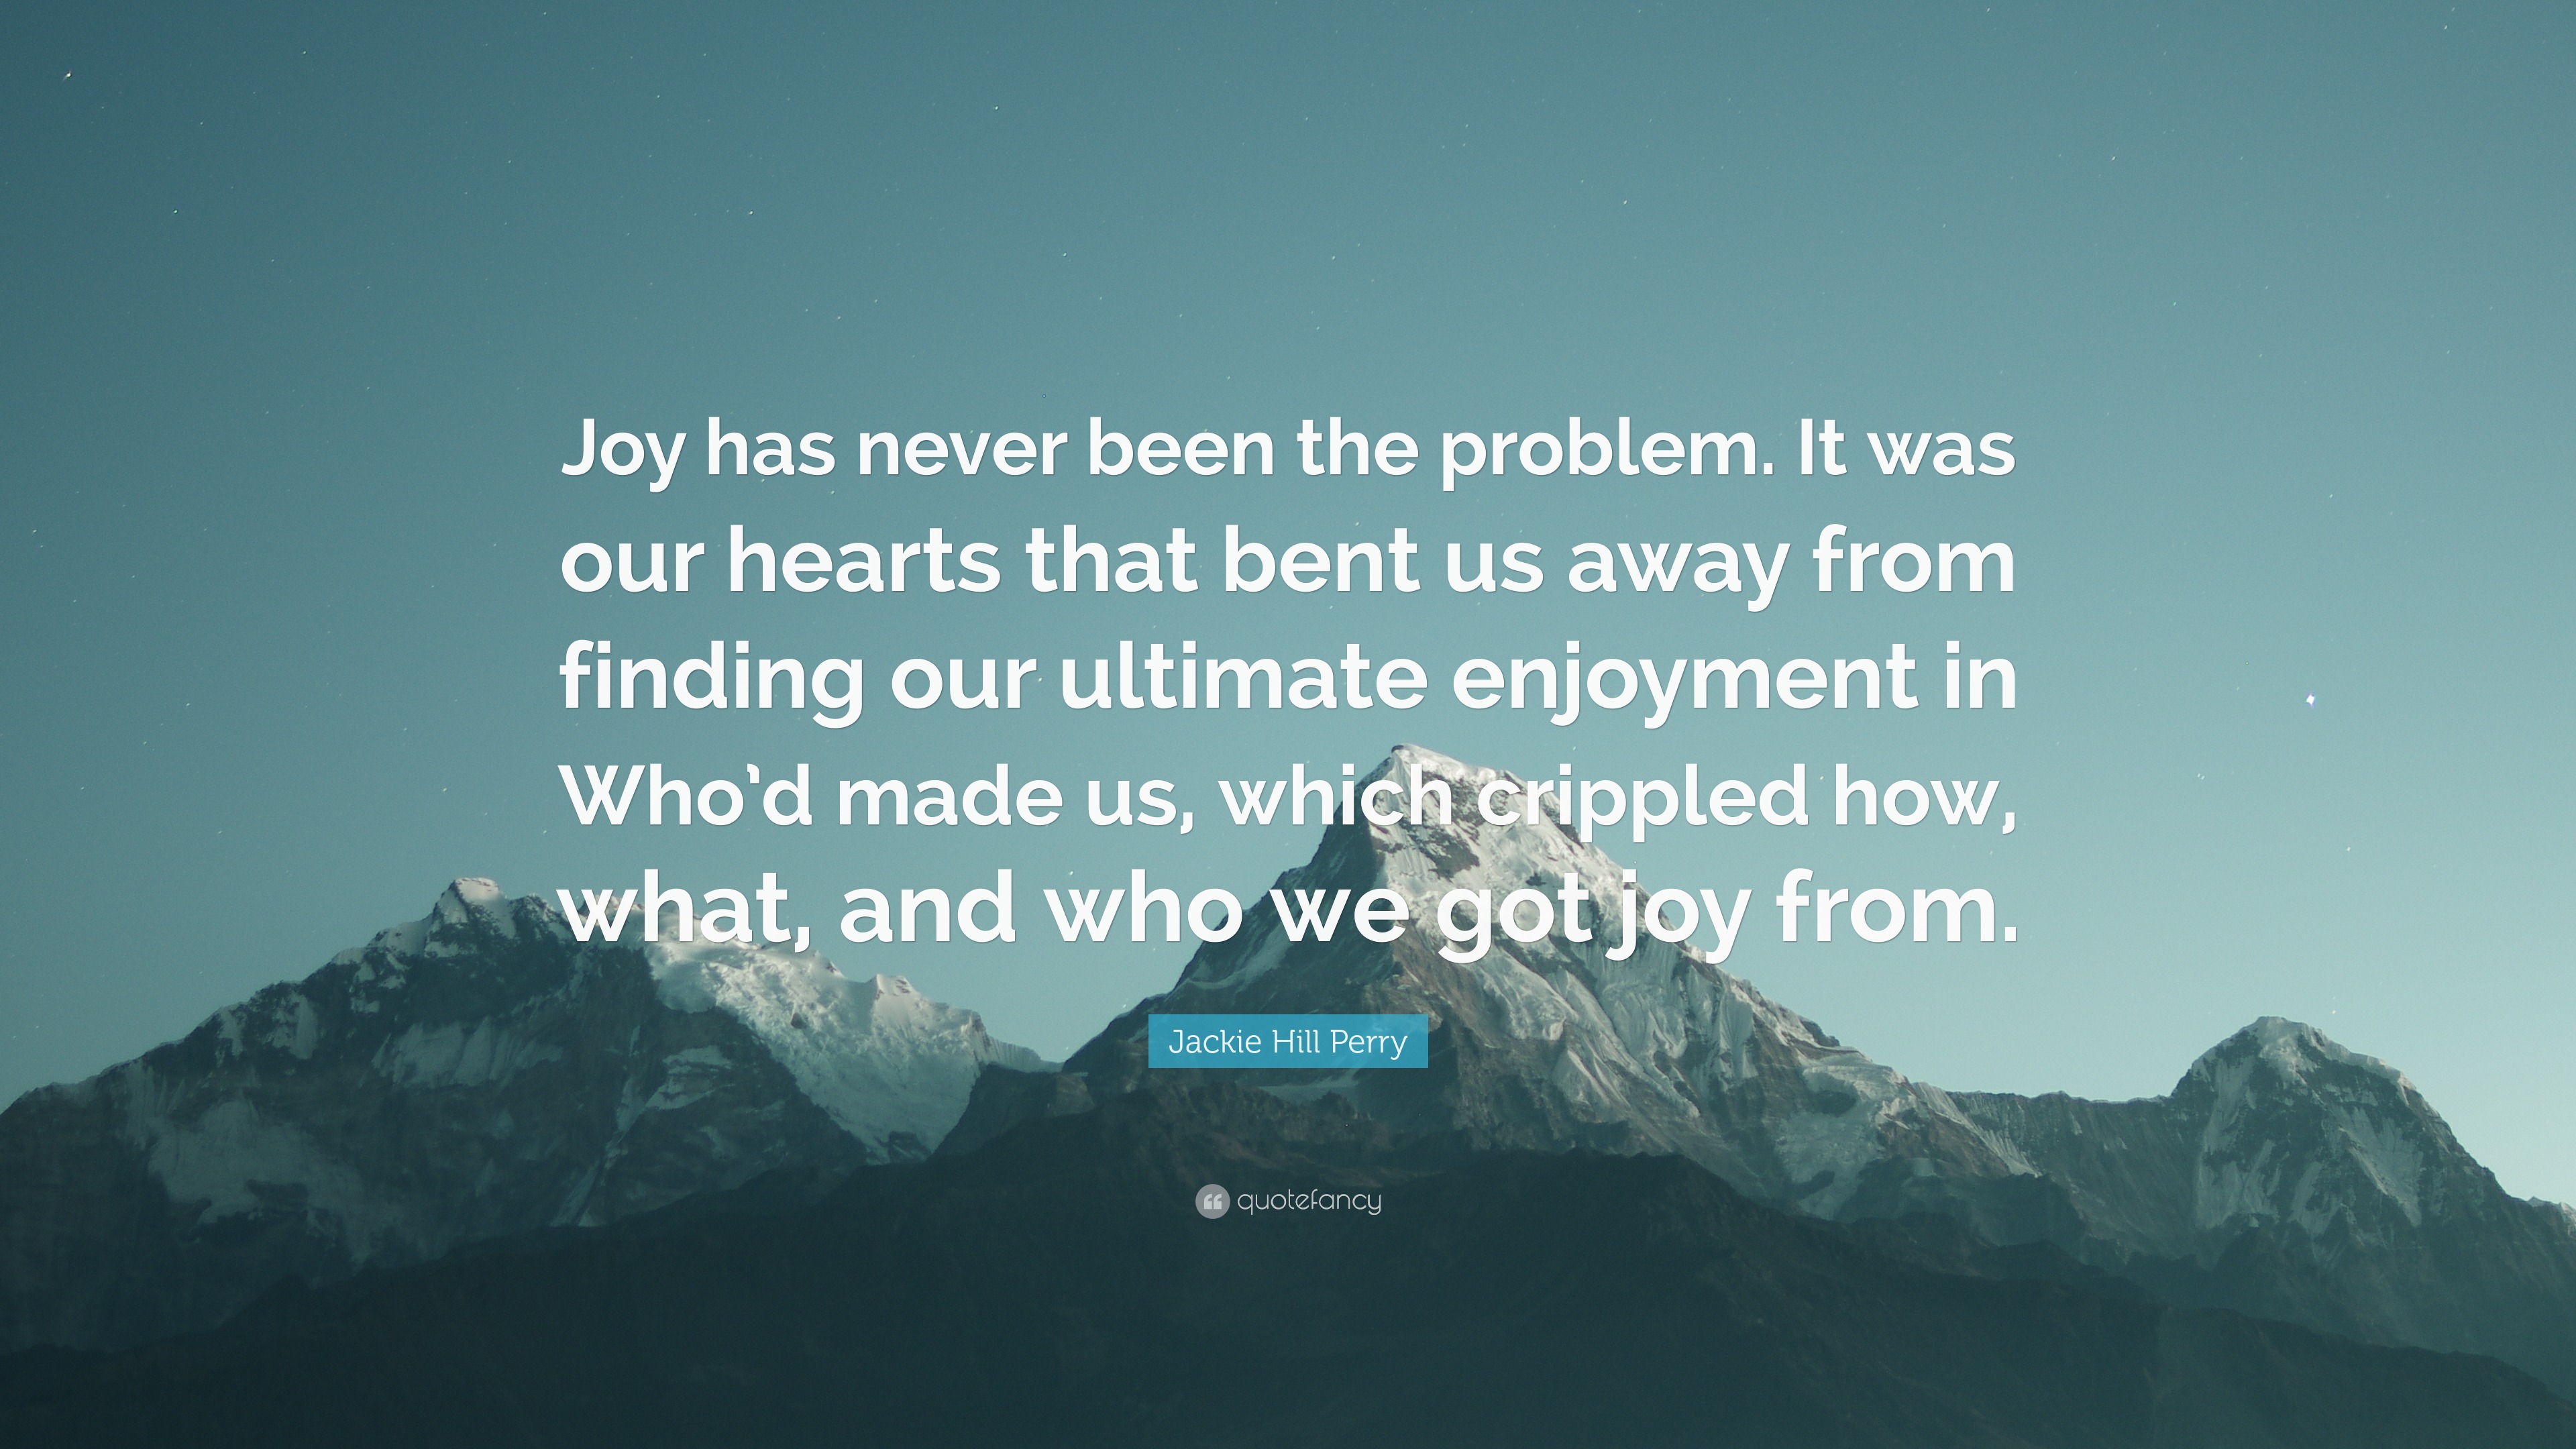 Jackie Hill Perry Quote: “Joy has never been the problem. It was our ...